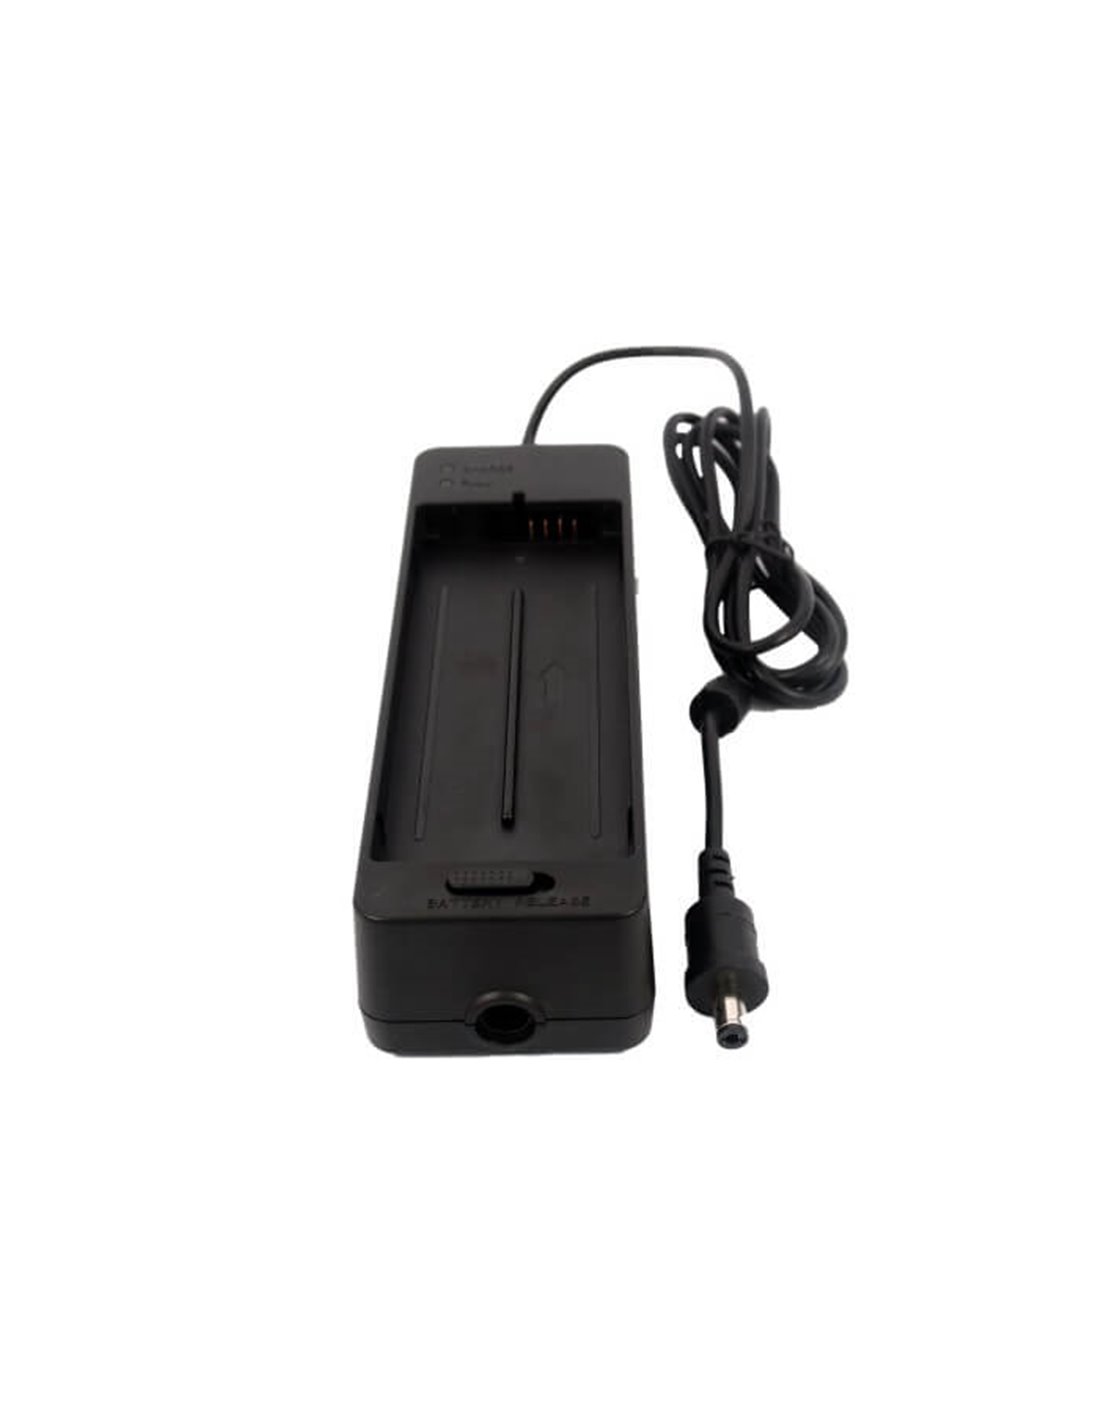 Canon Sephy Cp810, Sephy Cp-810 Printer Charger